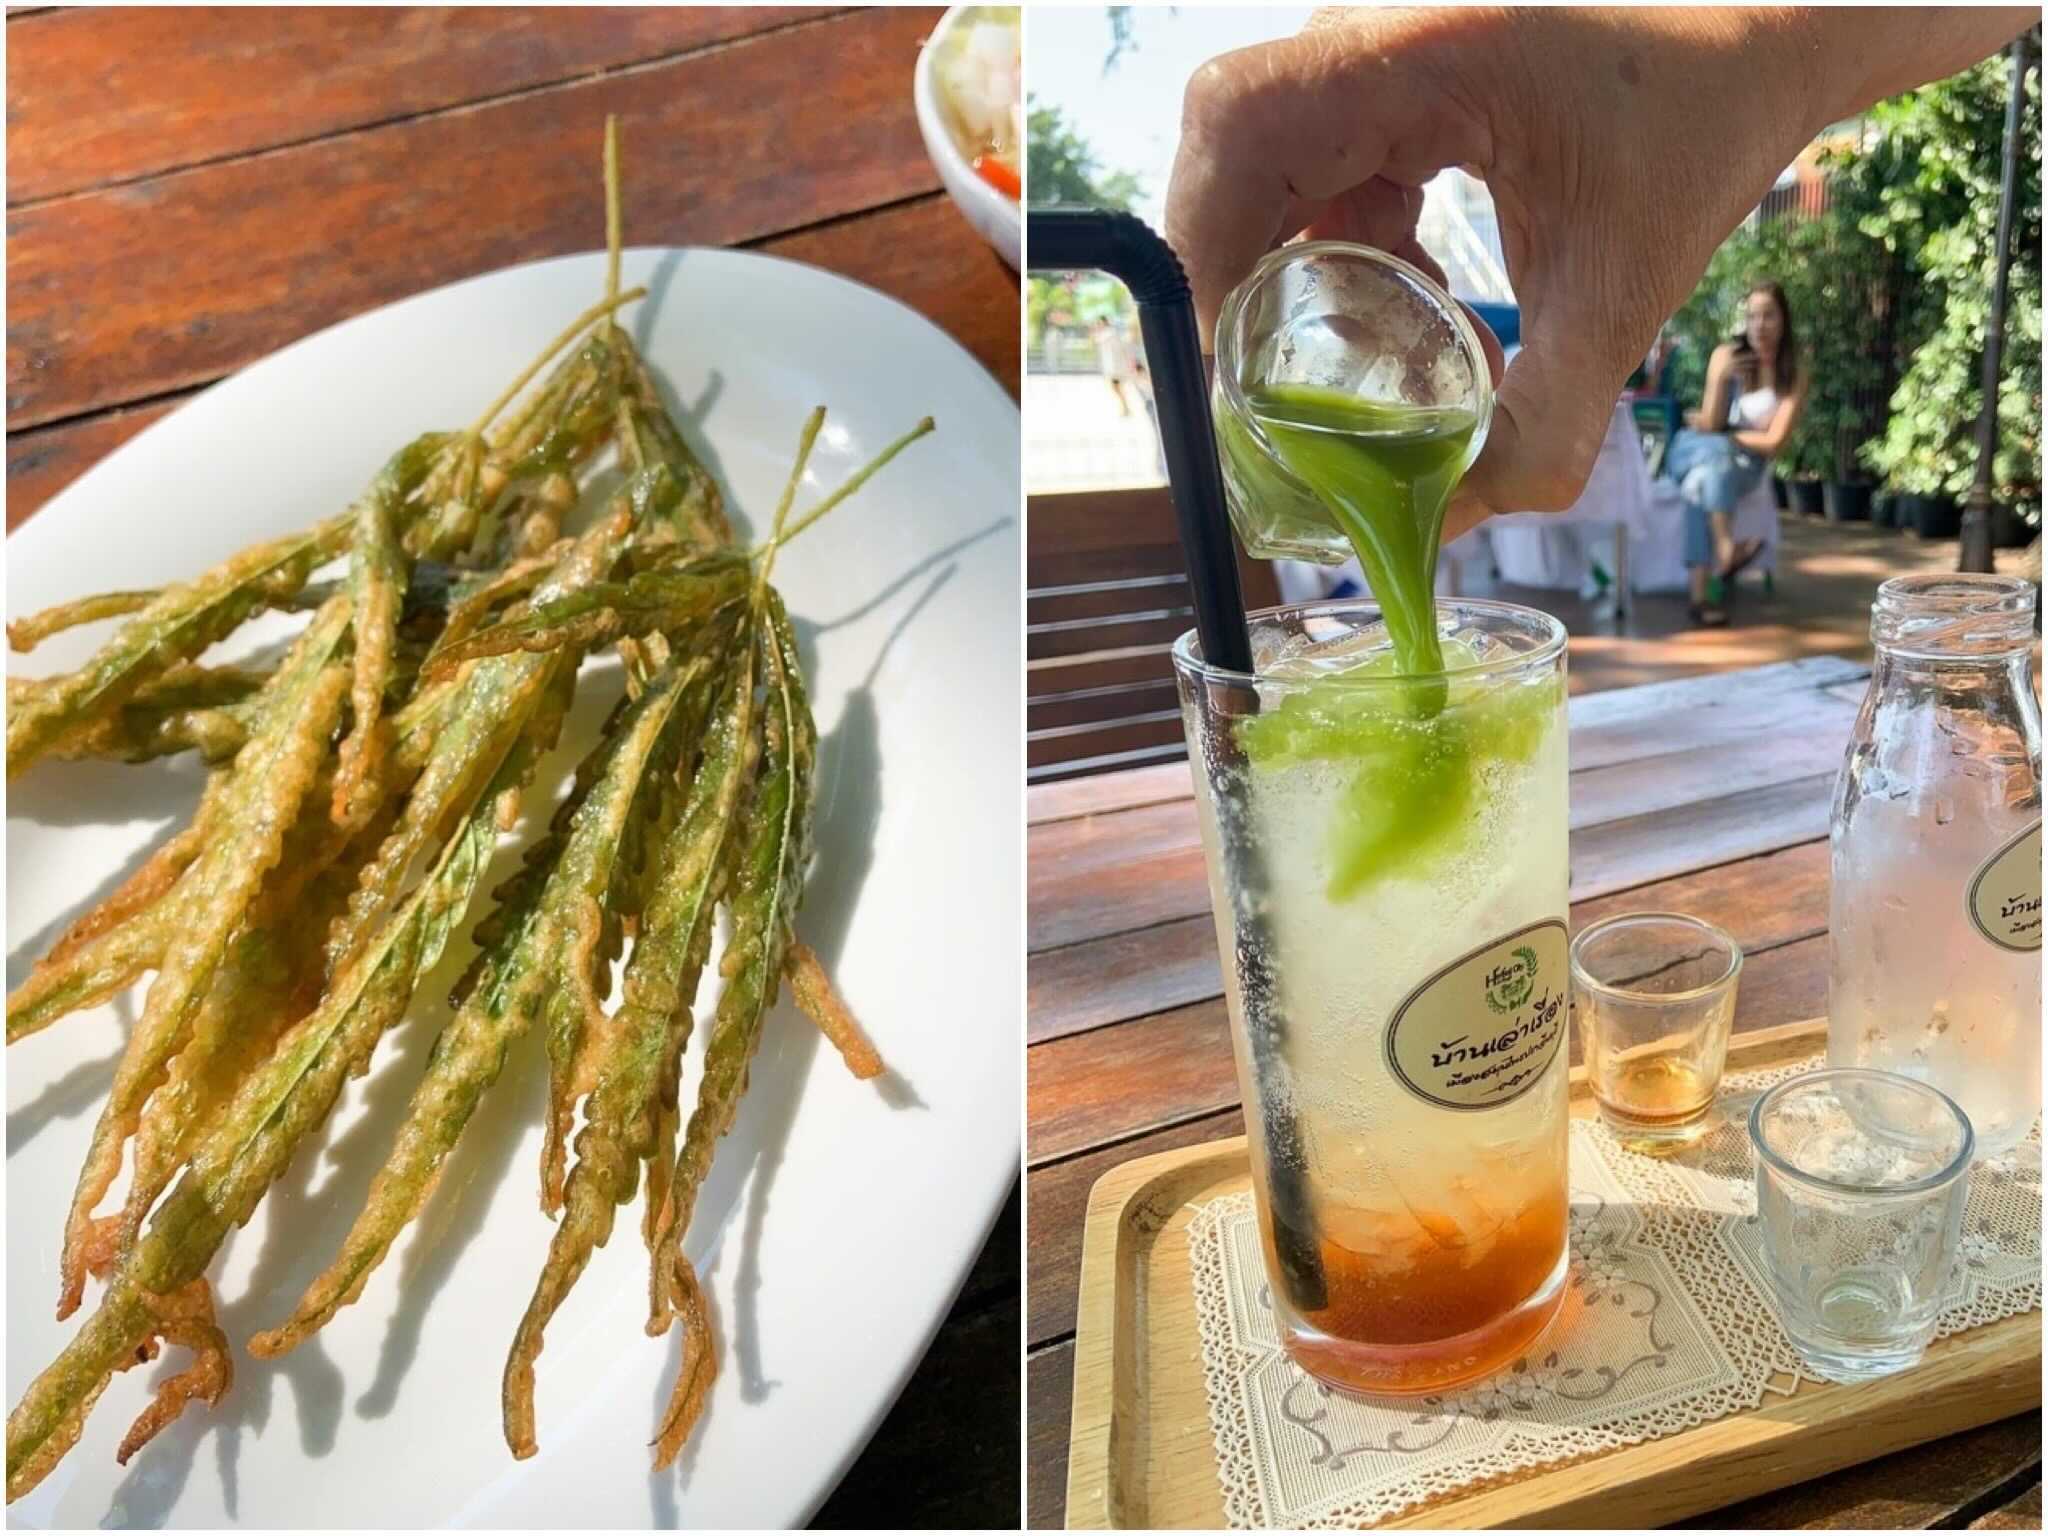 Deep-fried weed leaves served with spicy mango salad, at left, and sparkling passion fruit mixed with weed juice. Images: Coconuts 